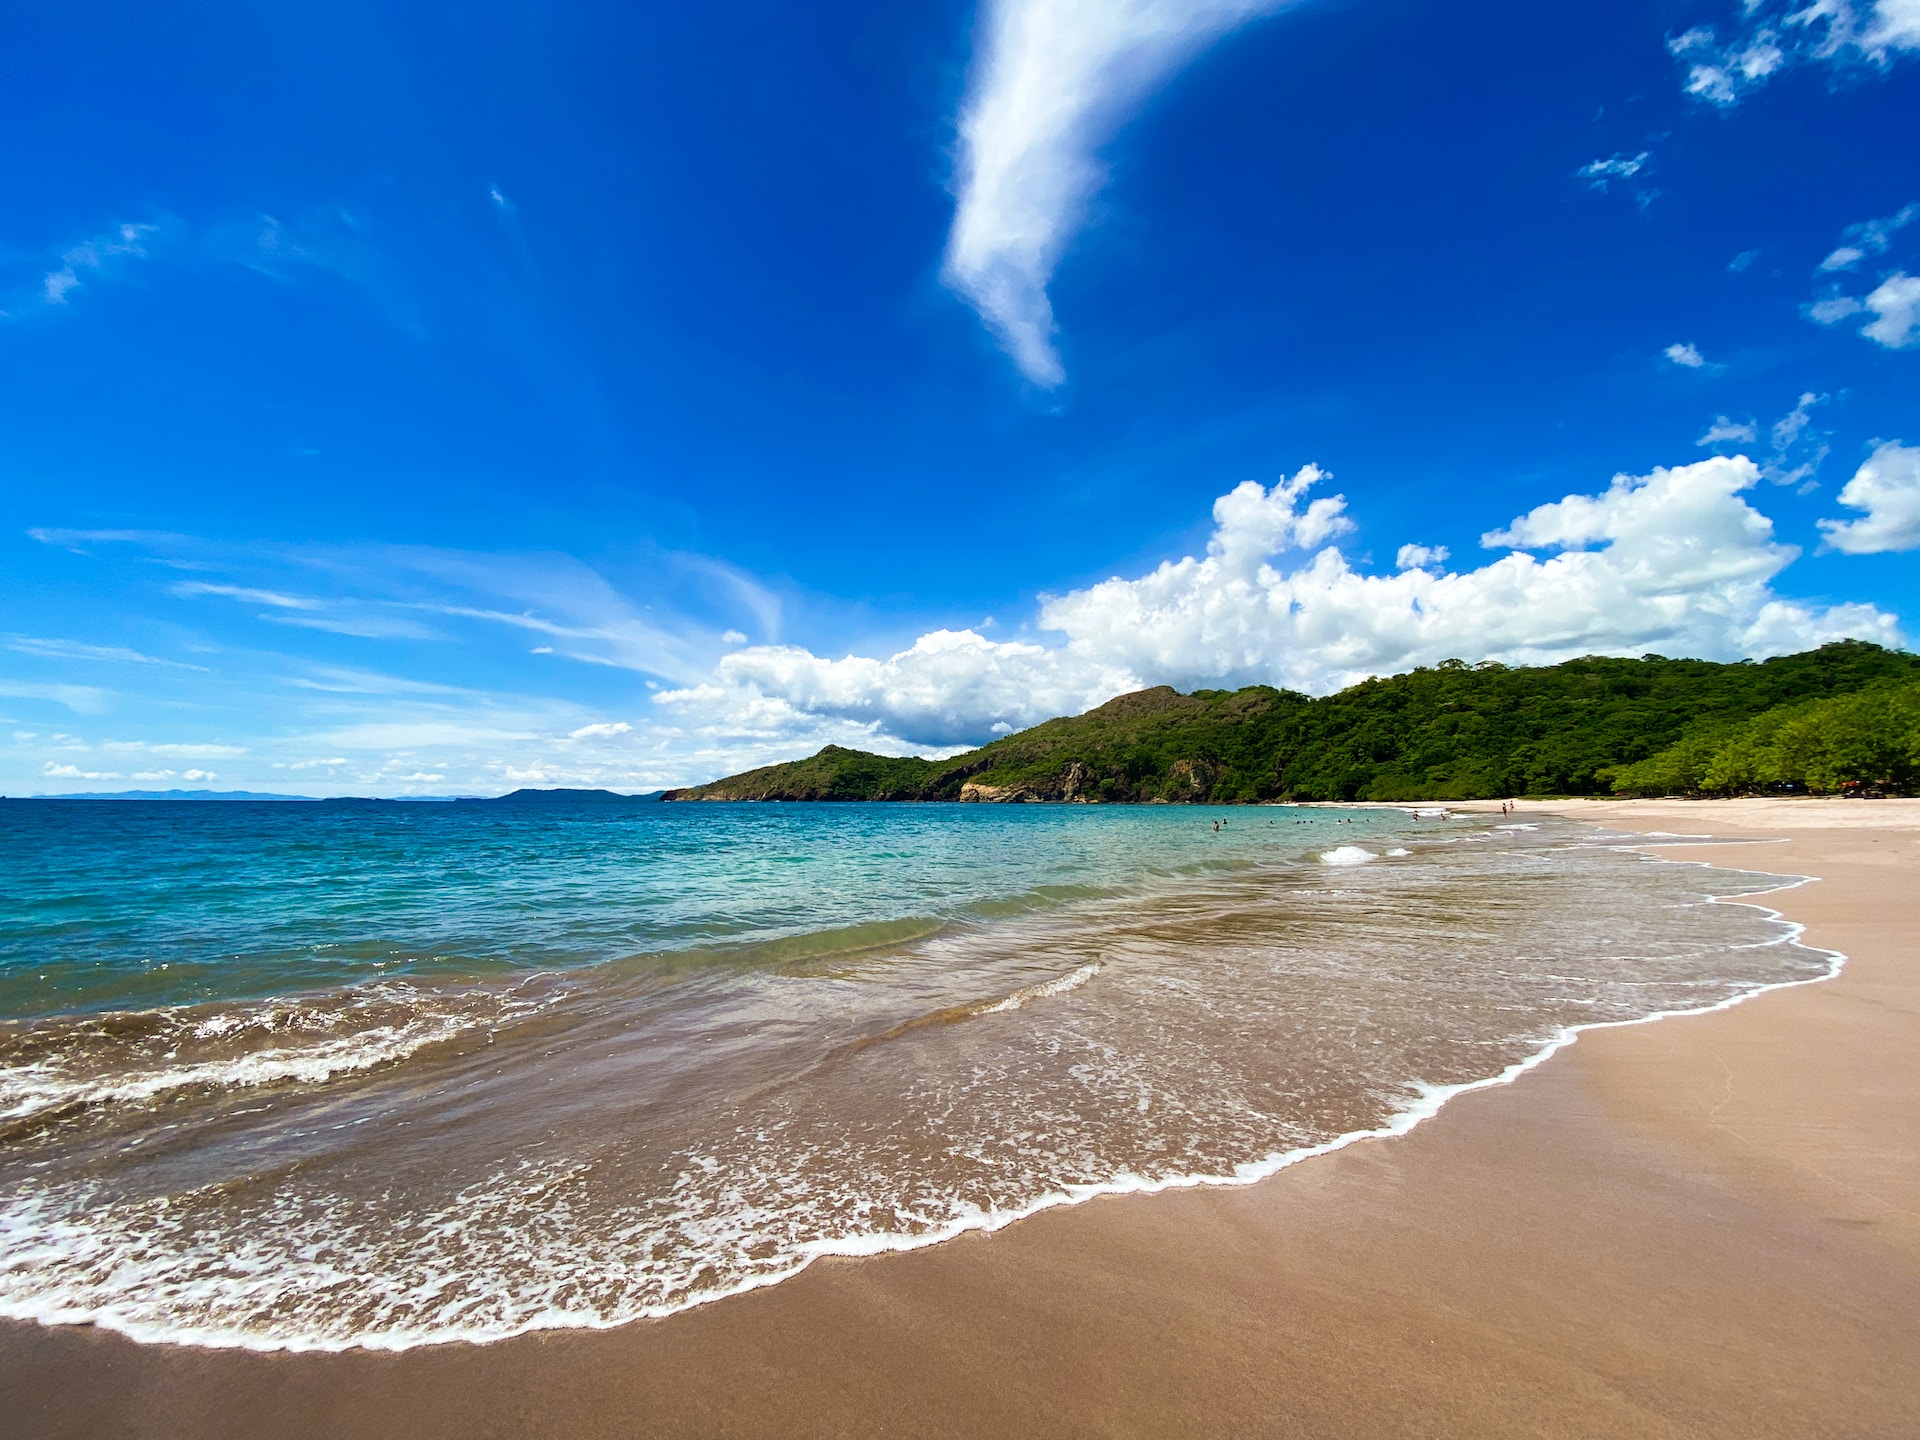 Helpful tips for getting around Costa Rica